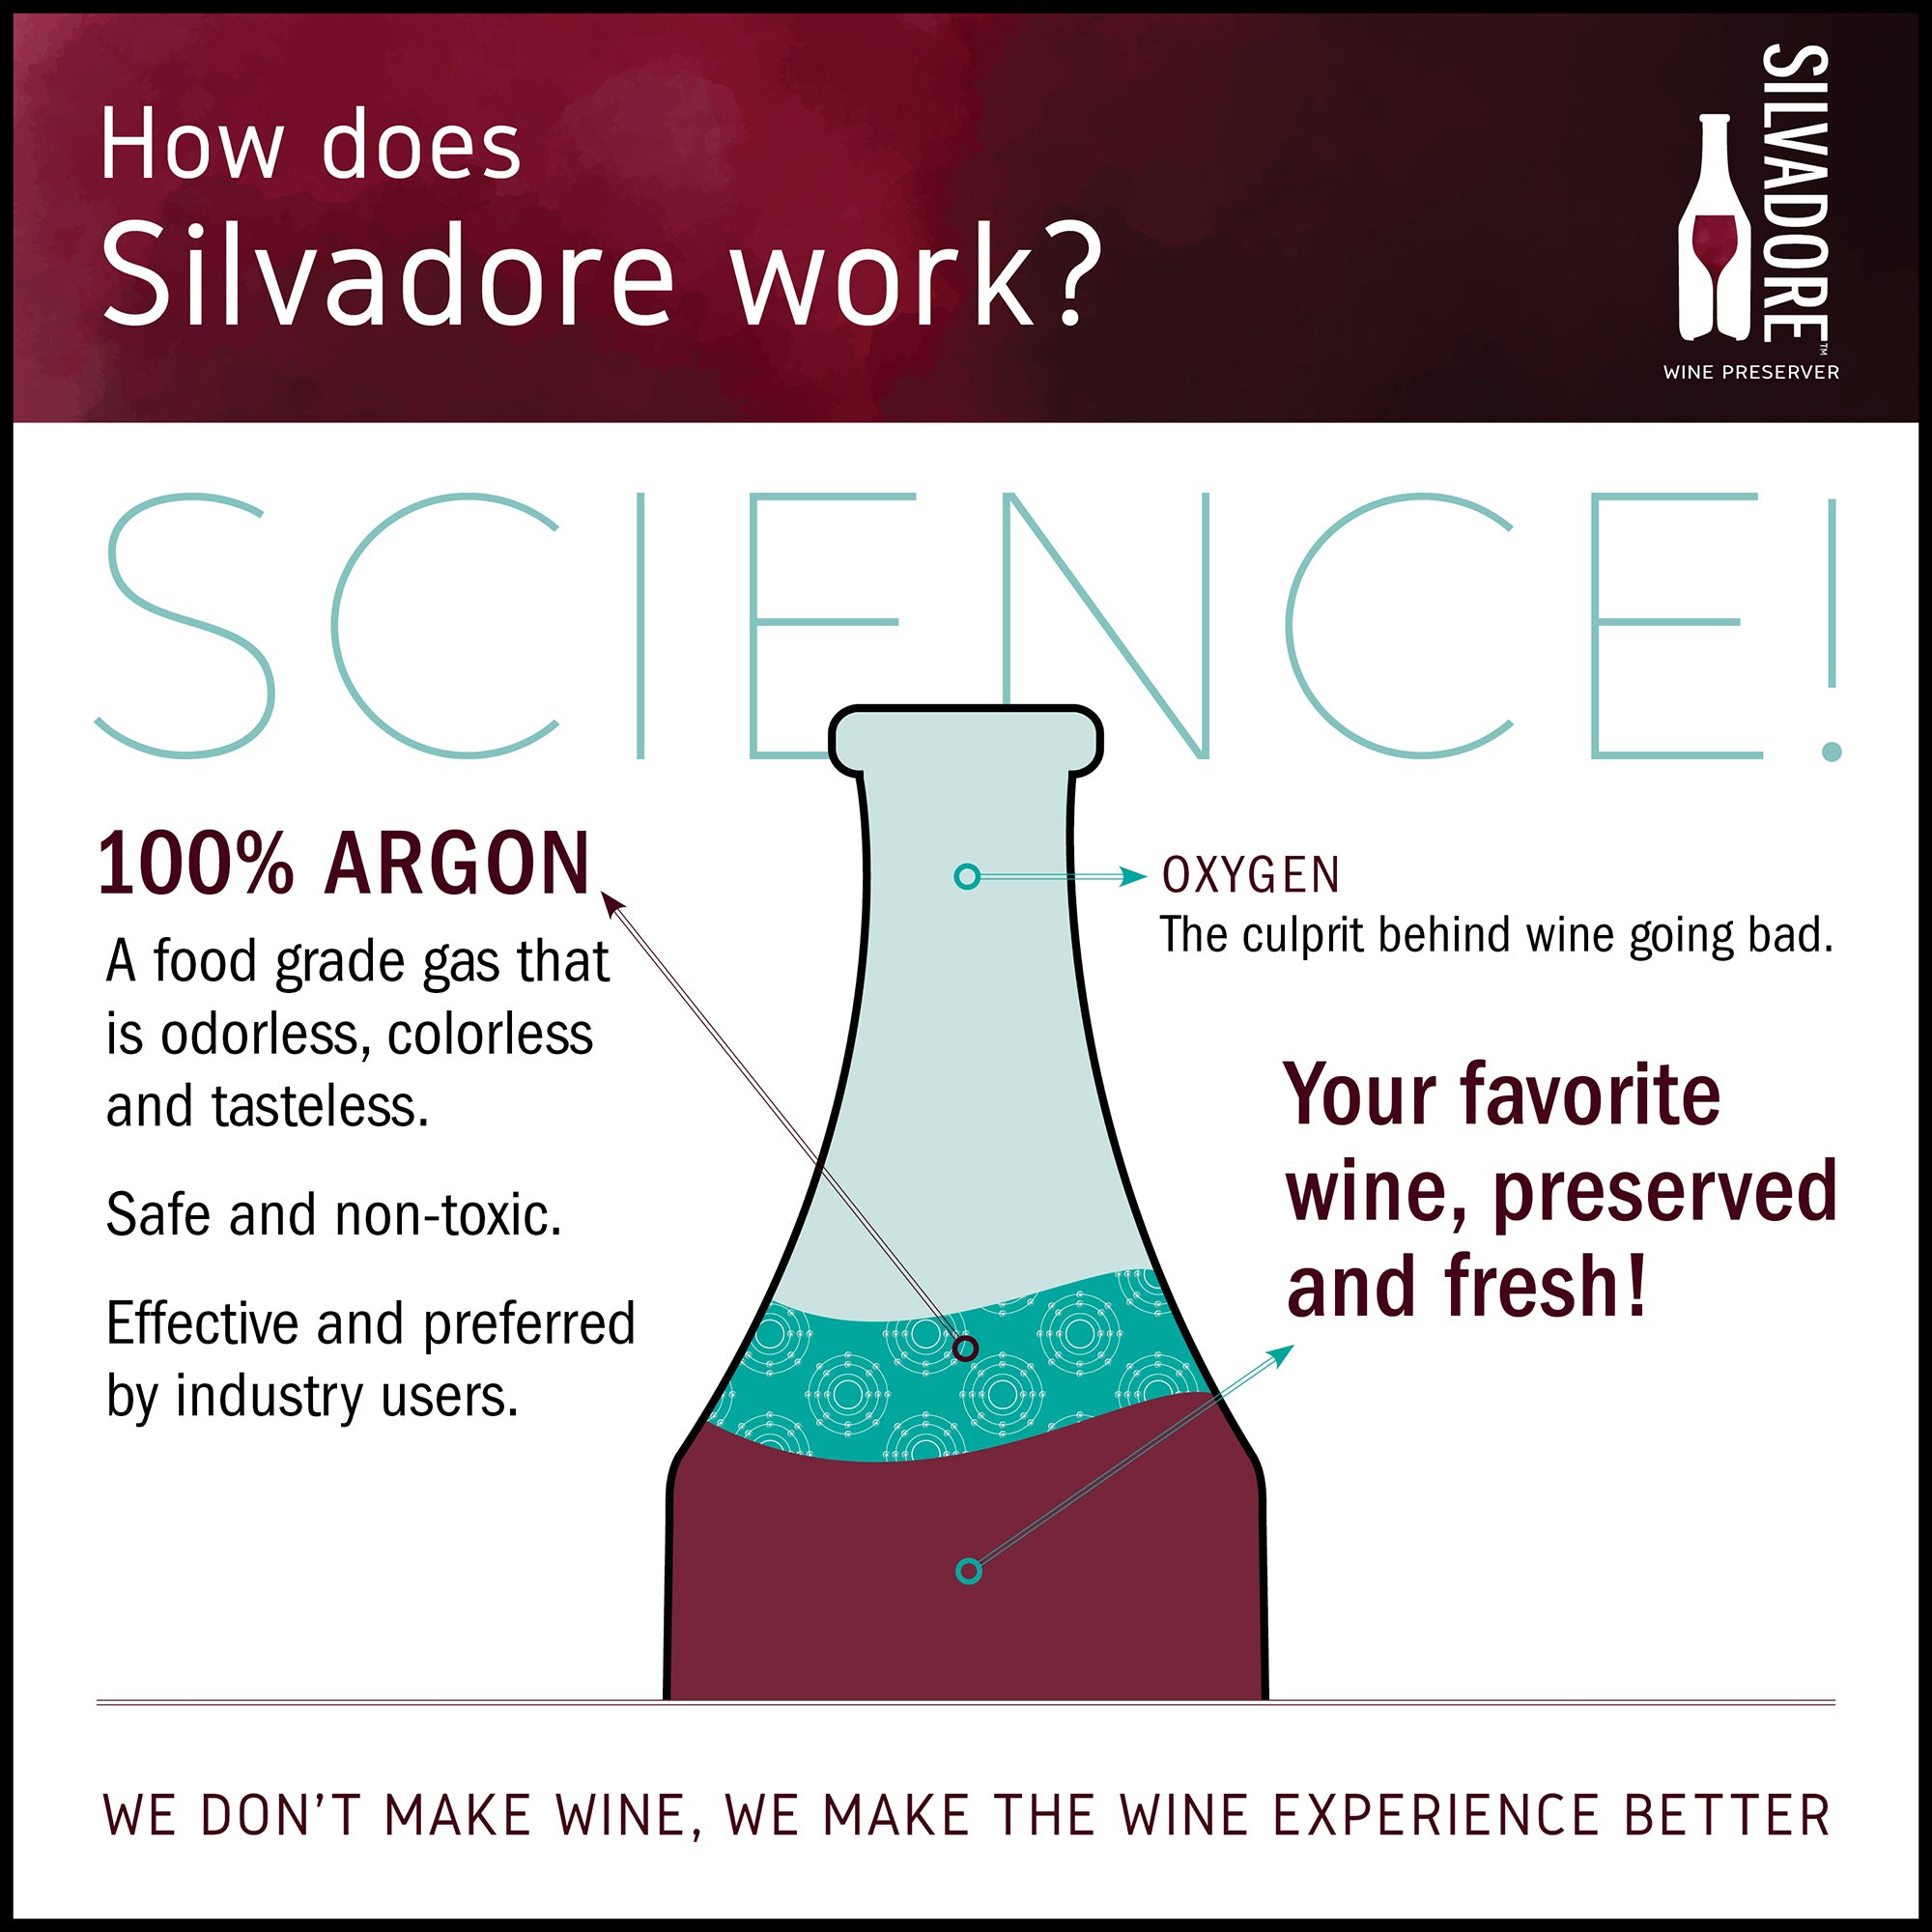 Silvadore Brands in the News